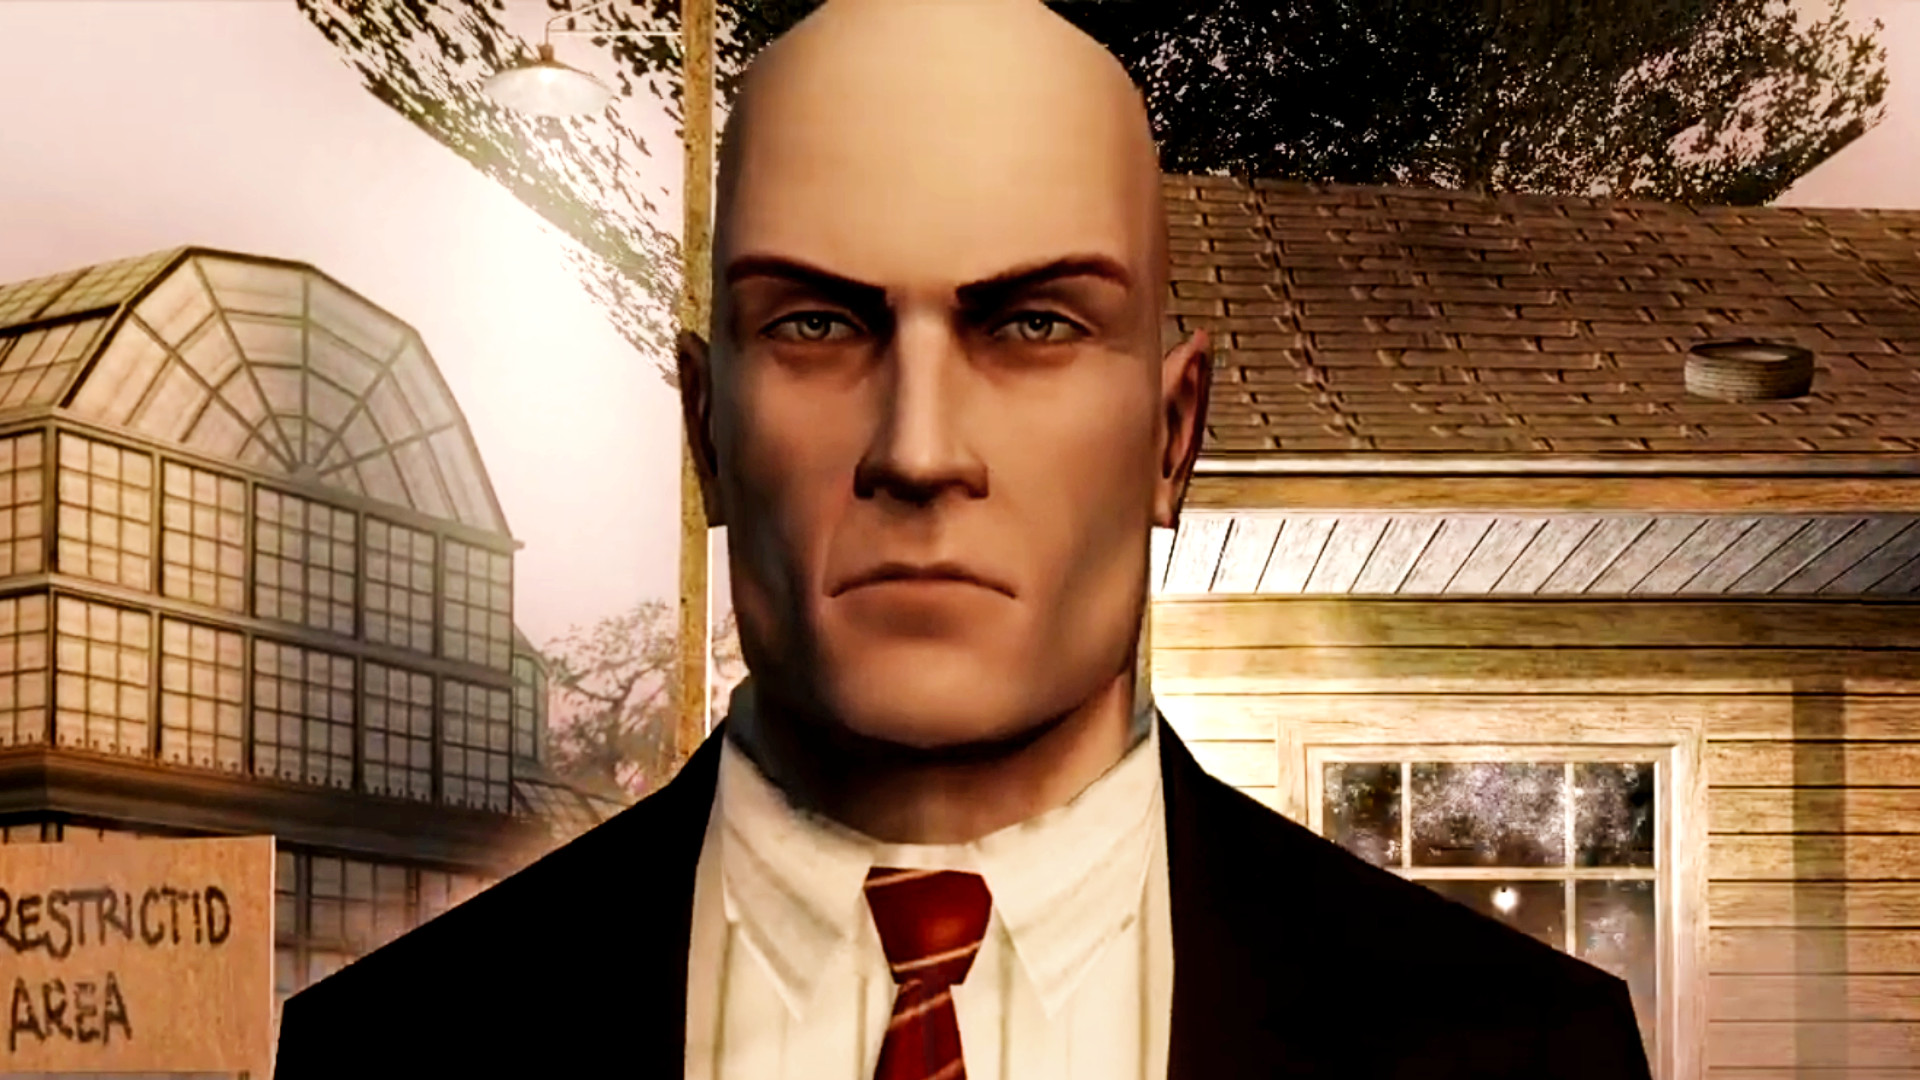 How to play Hitman 3 for Android 